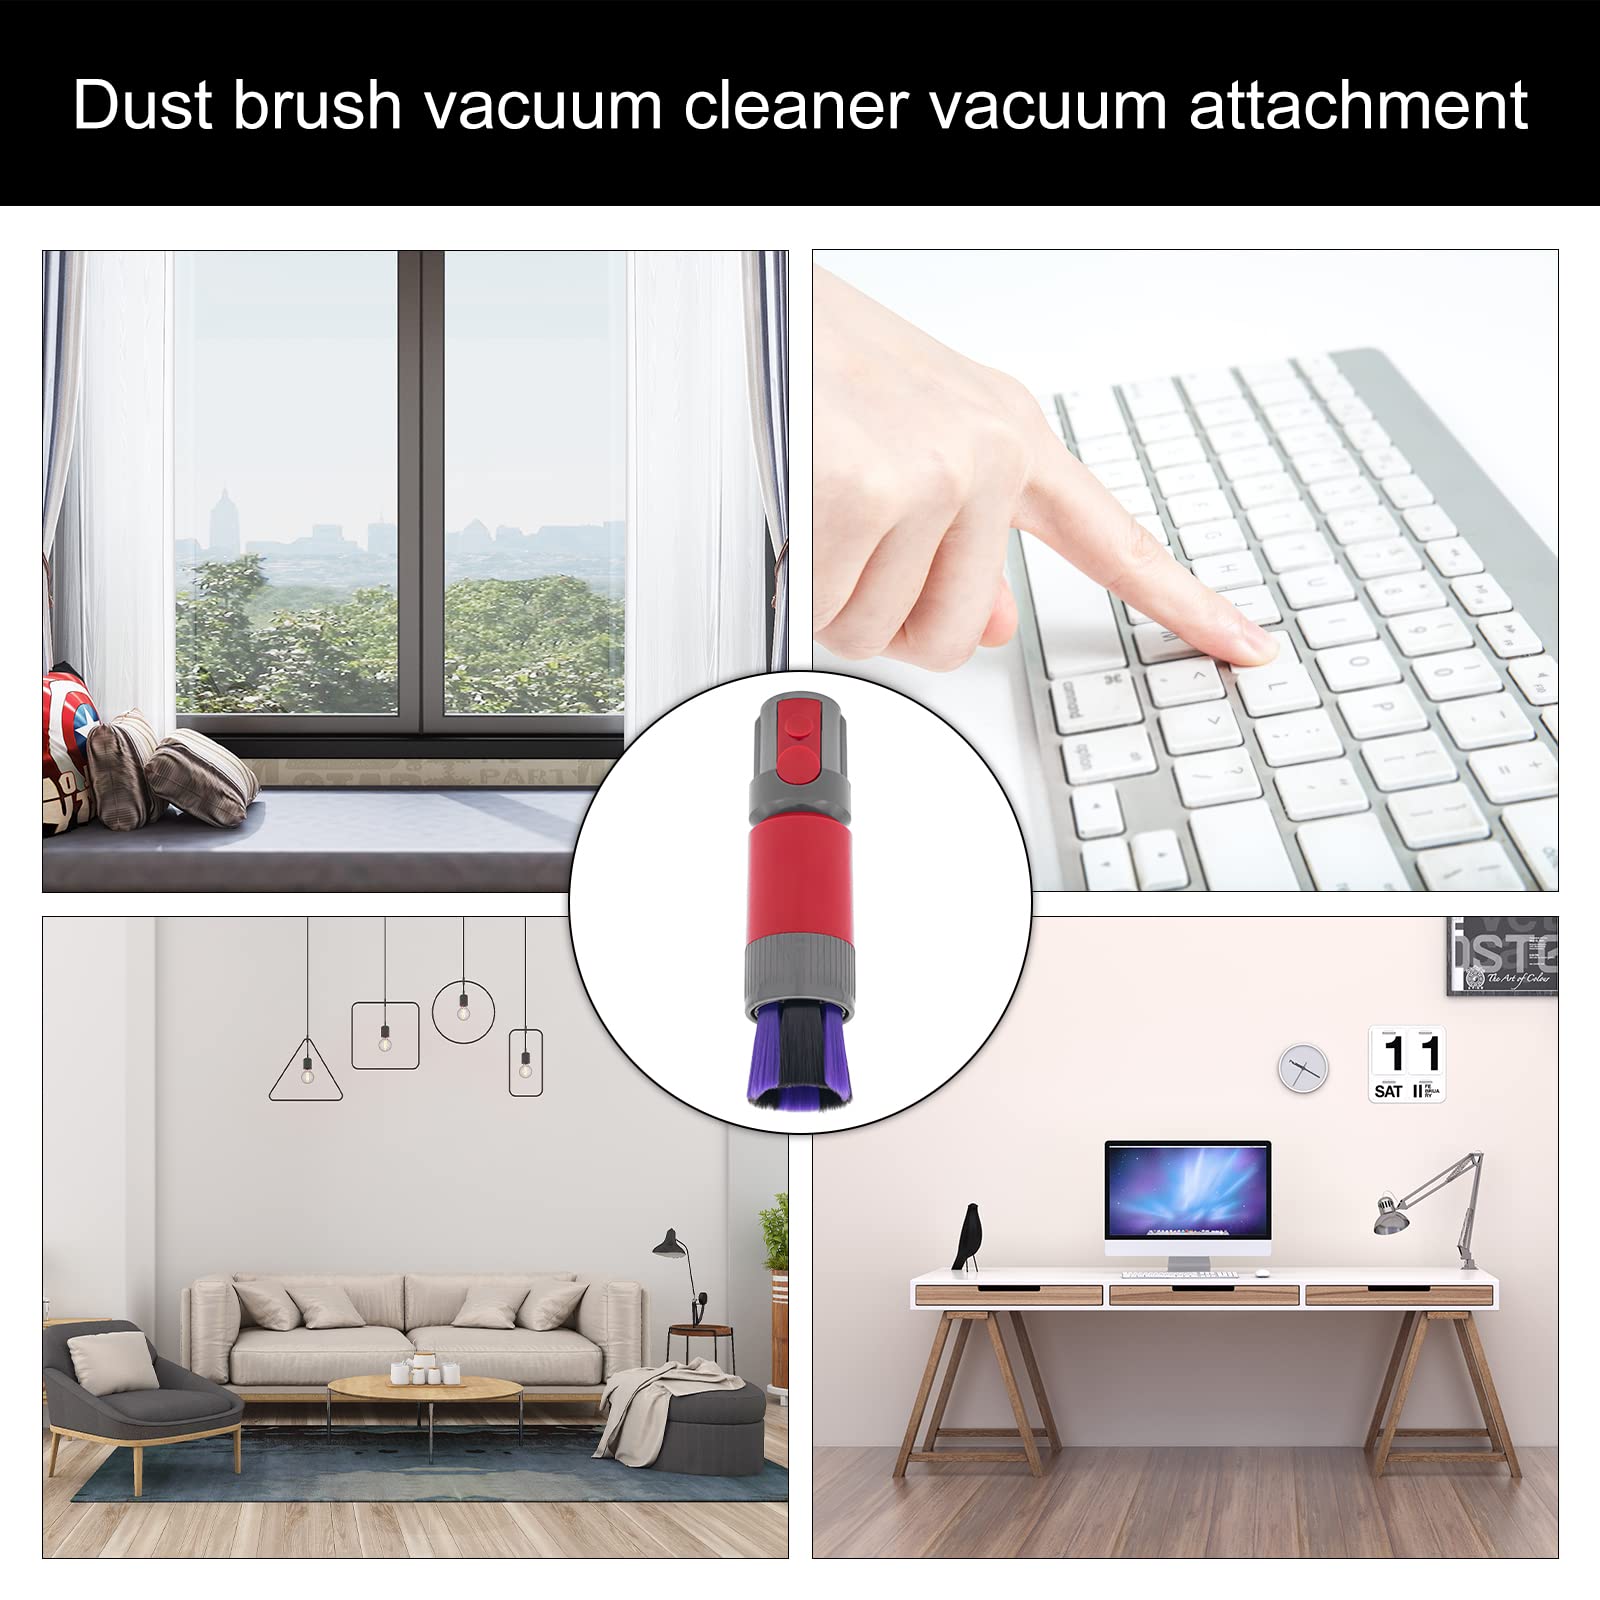 Coodss Traceless Dust Brush Replacement Compatible with Dyson V7 V8 V10 V11 V15 Vacuum Cleaner, Soft Bristle Dust Removal Brush Head, Scratch-Free Dusting Brush